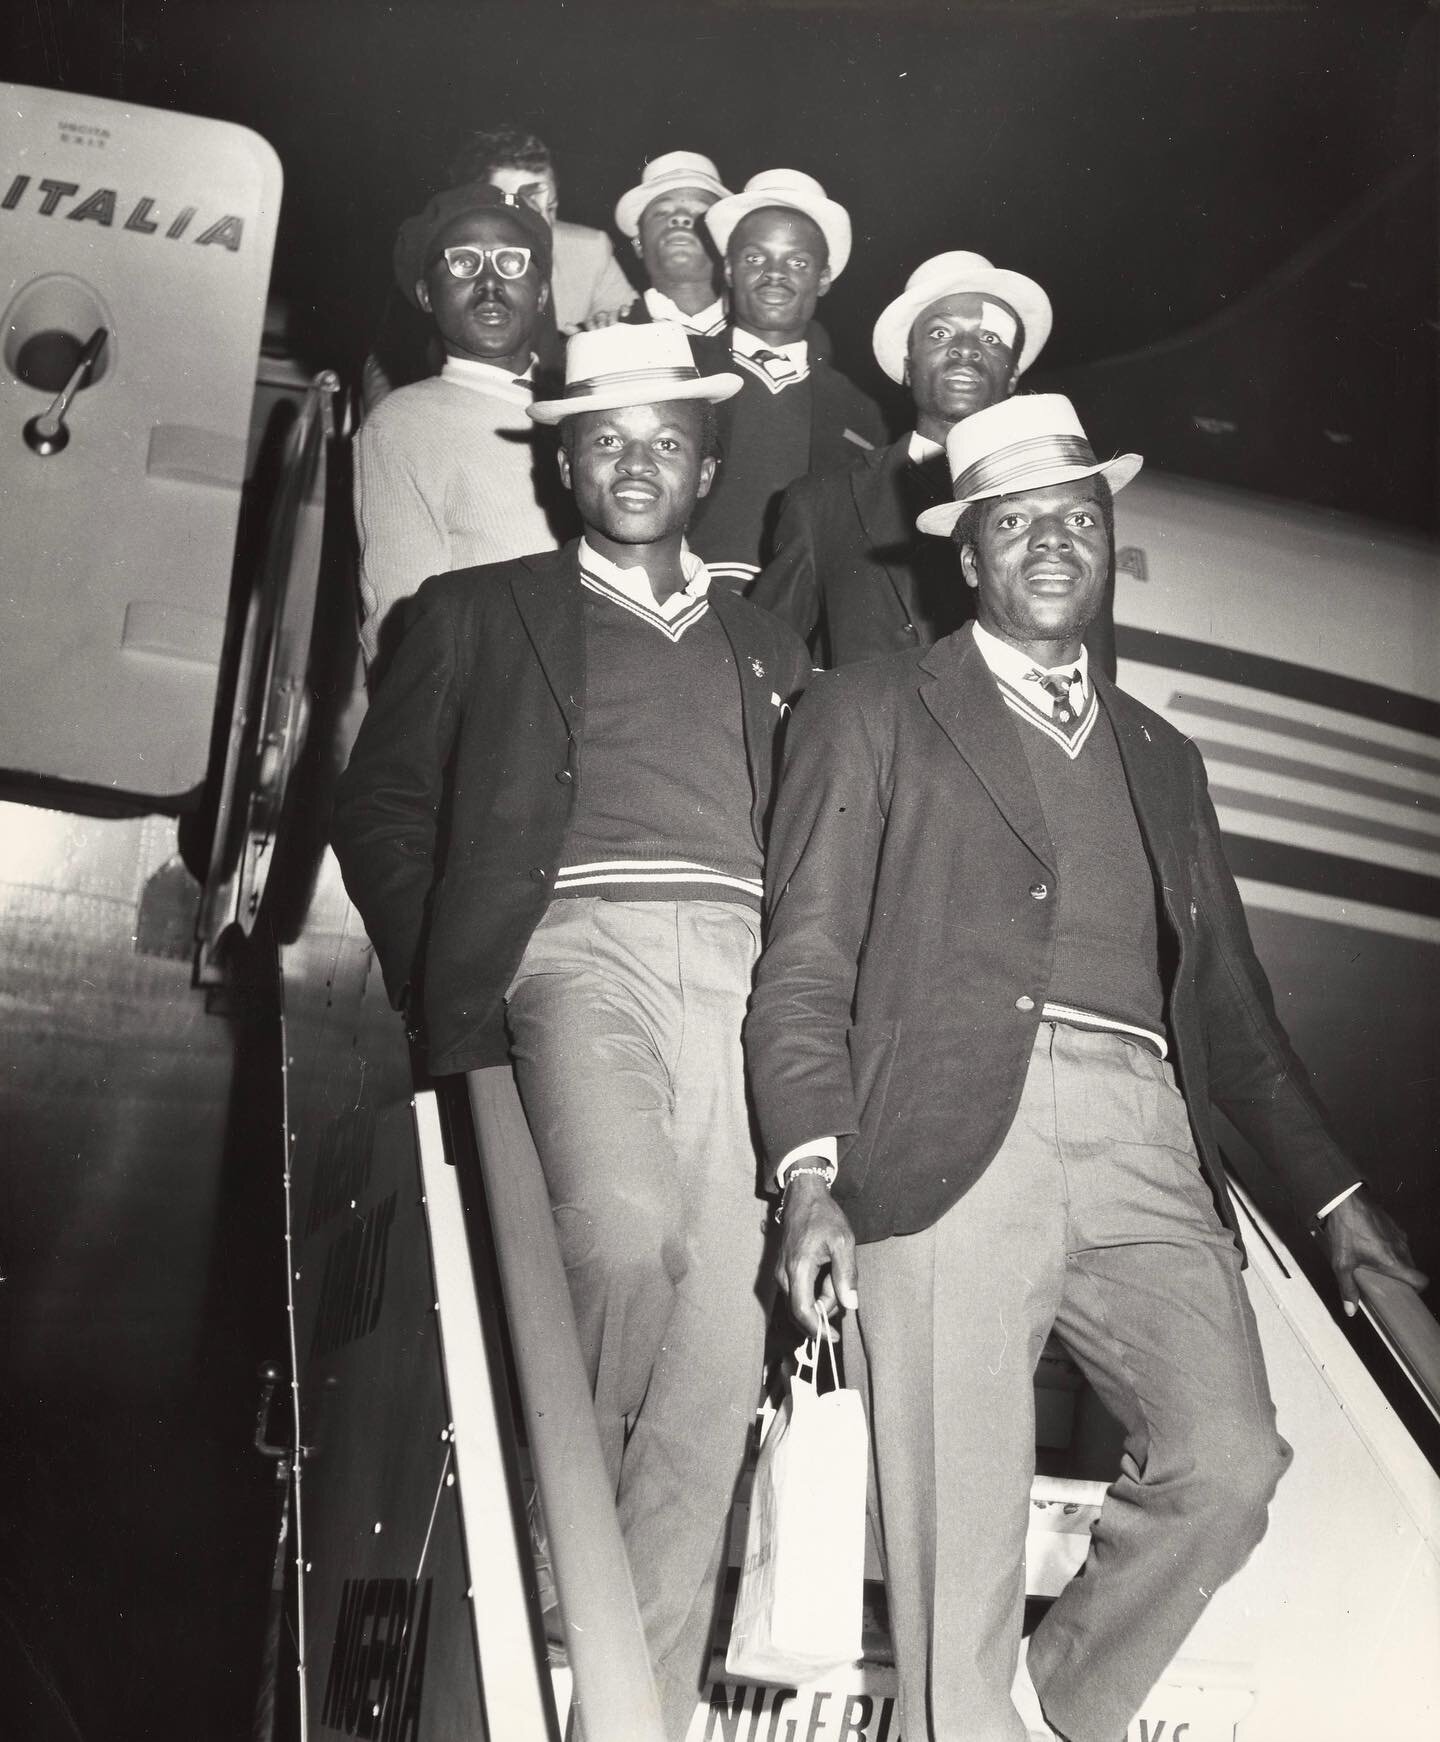 Photographs taken before and during the African Society of African Culture (AMSAC) Festival in Lagos, Nigeria held on December 18-19, 1961

Photo 1: The Nigerian National Football team arriving in Lagos from Rome, December 14th 1961

Photo 2: Nina Si